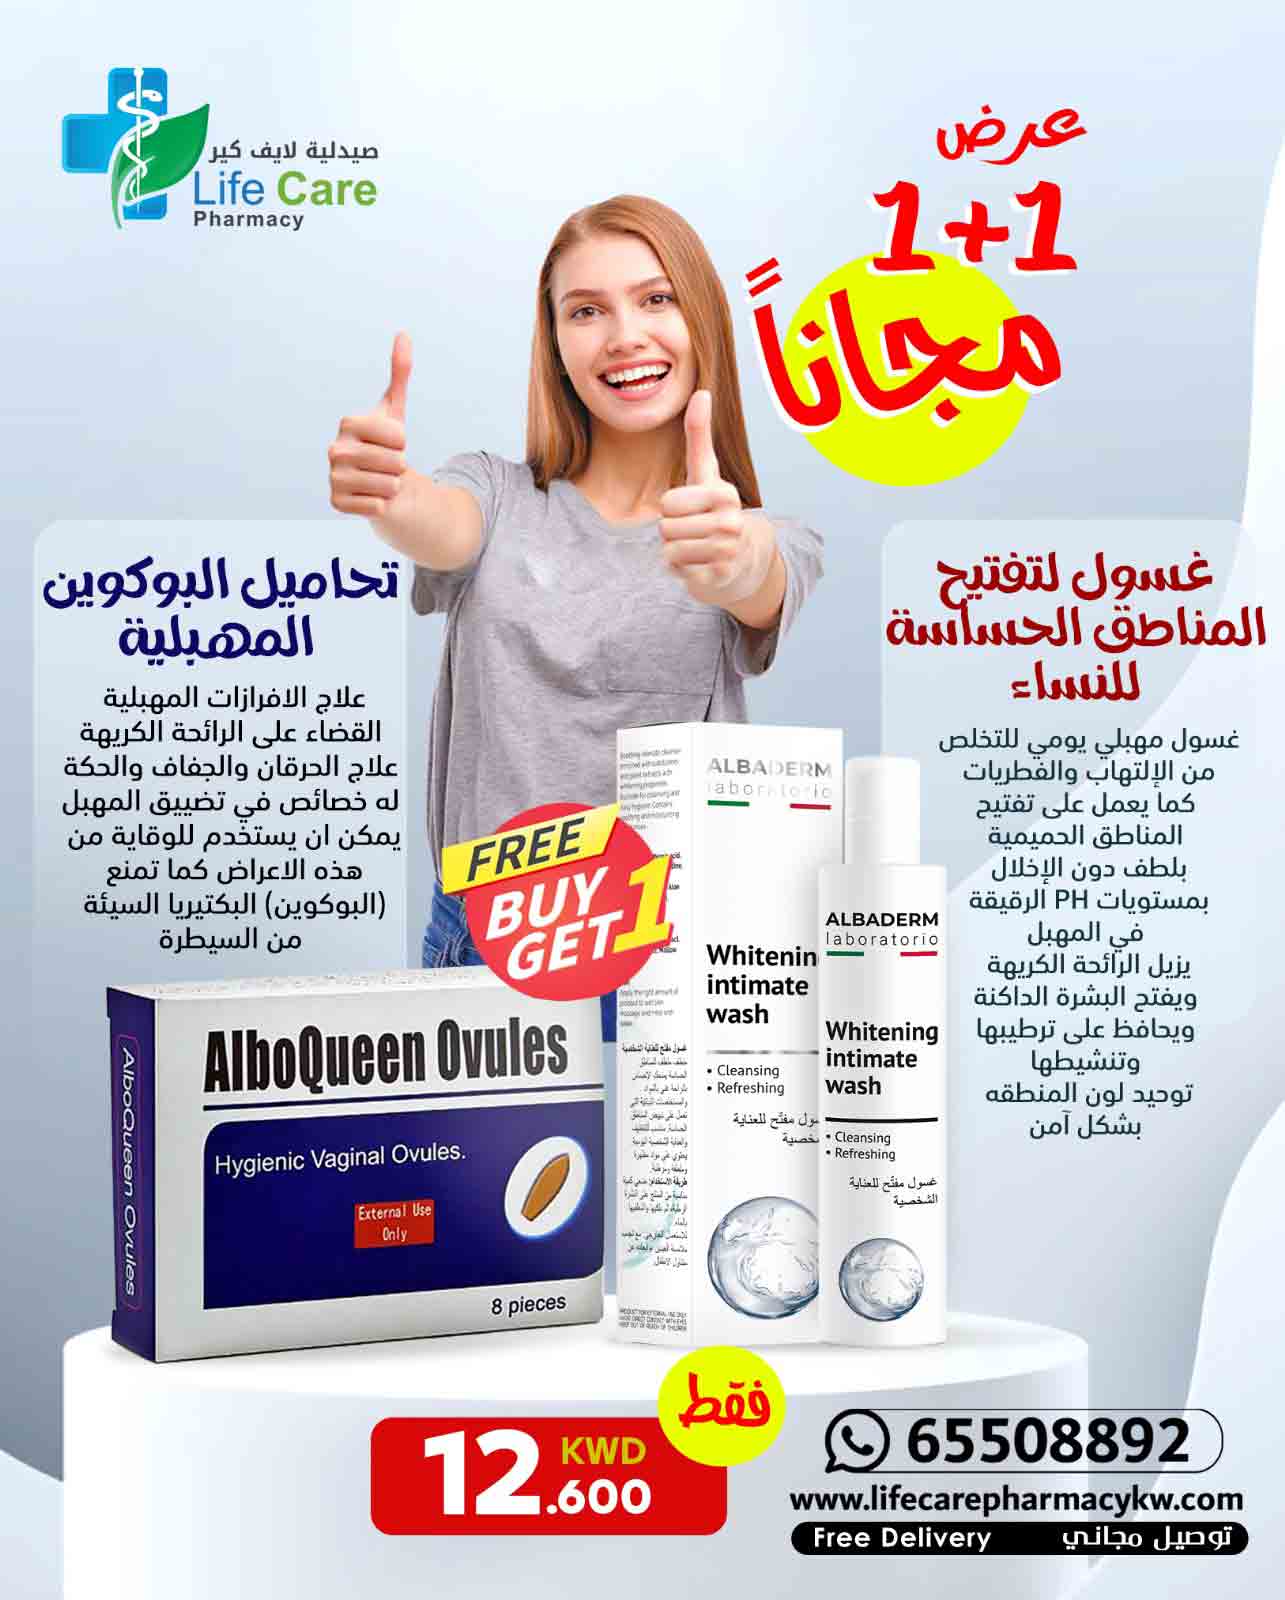 PACKAGE 12 - Life Care Pharmacy